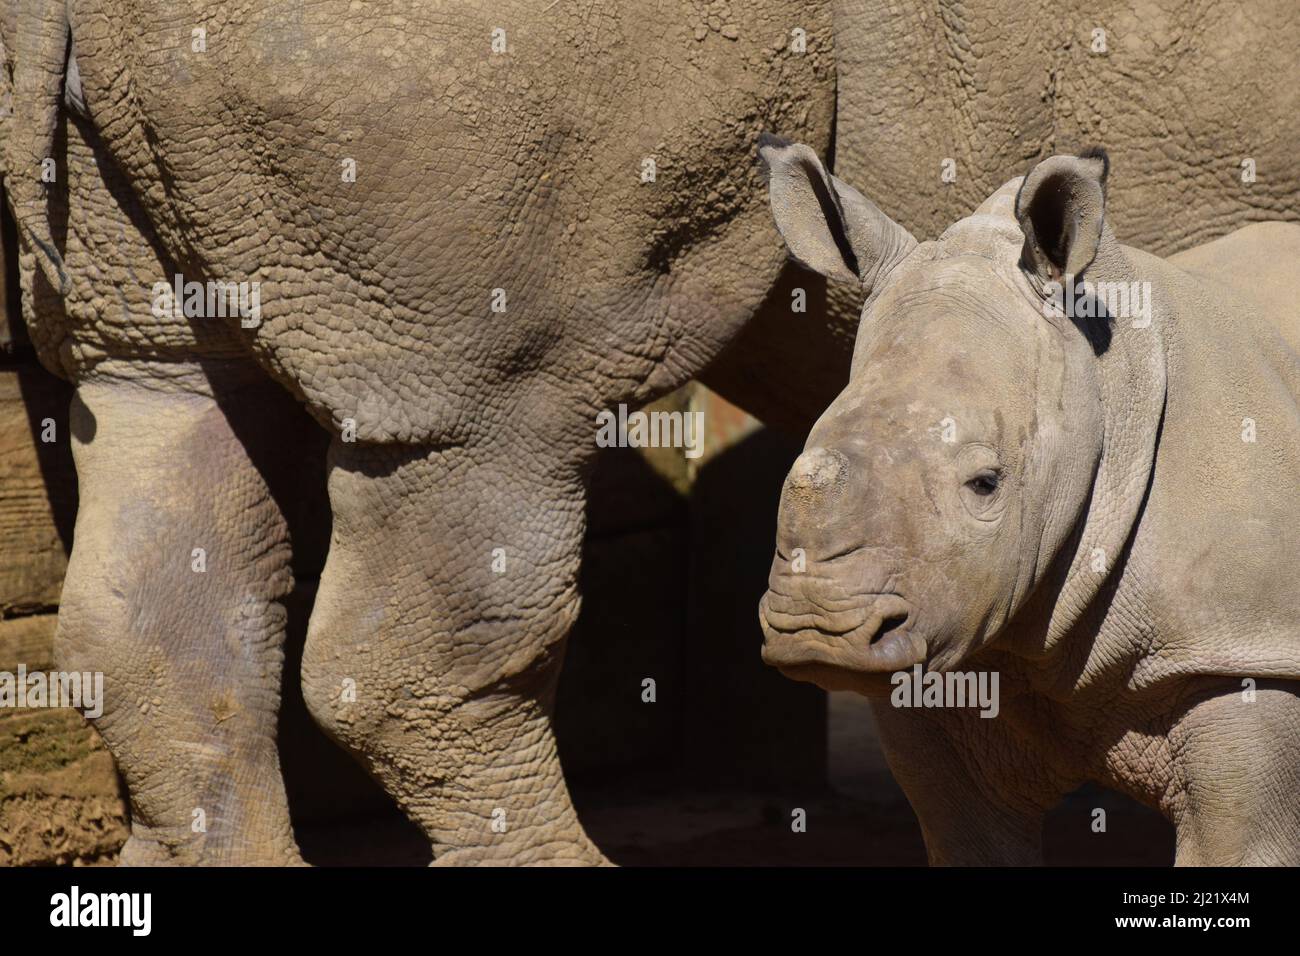 A baby southern white rhinoceros born in captivity in 2022 as part of the breeding program for white rhinos who are critically endangered in the wild Stock Photo